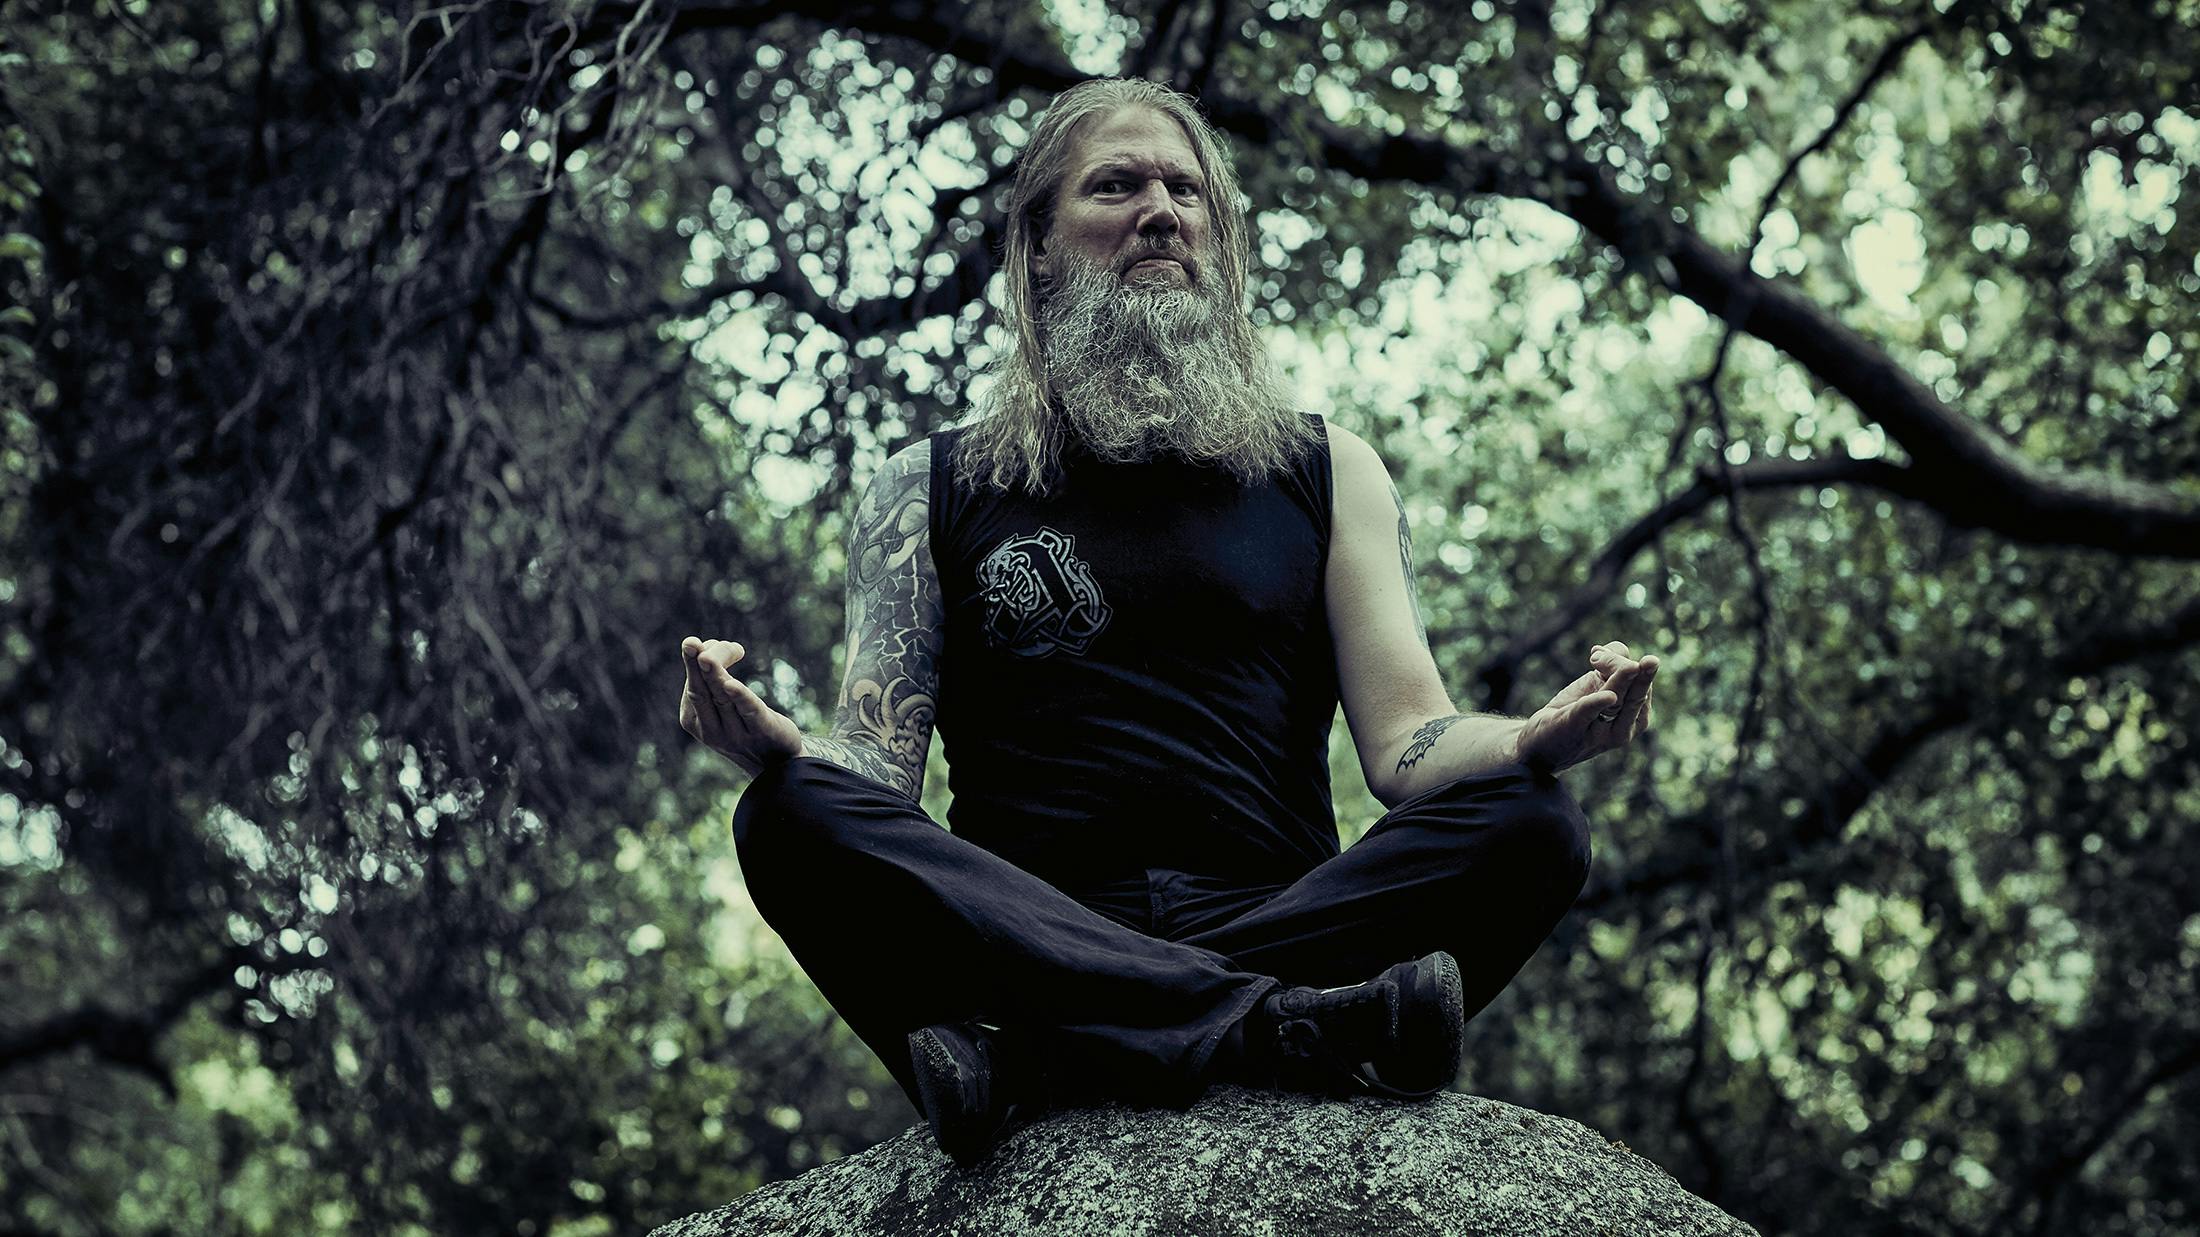 Can Vikings save the planet? Johan Hegg thinks so